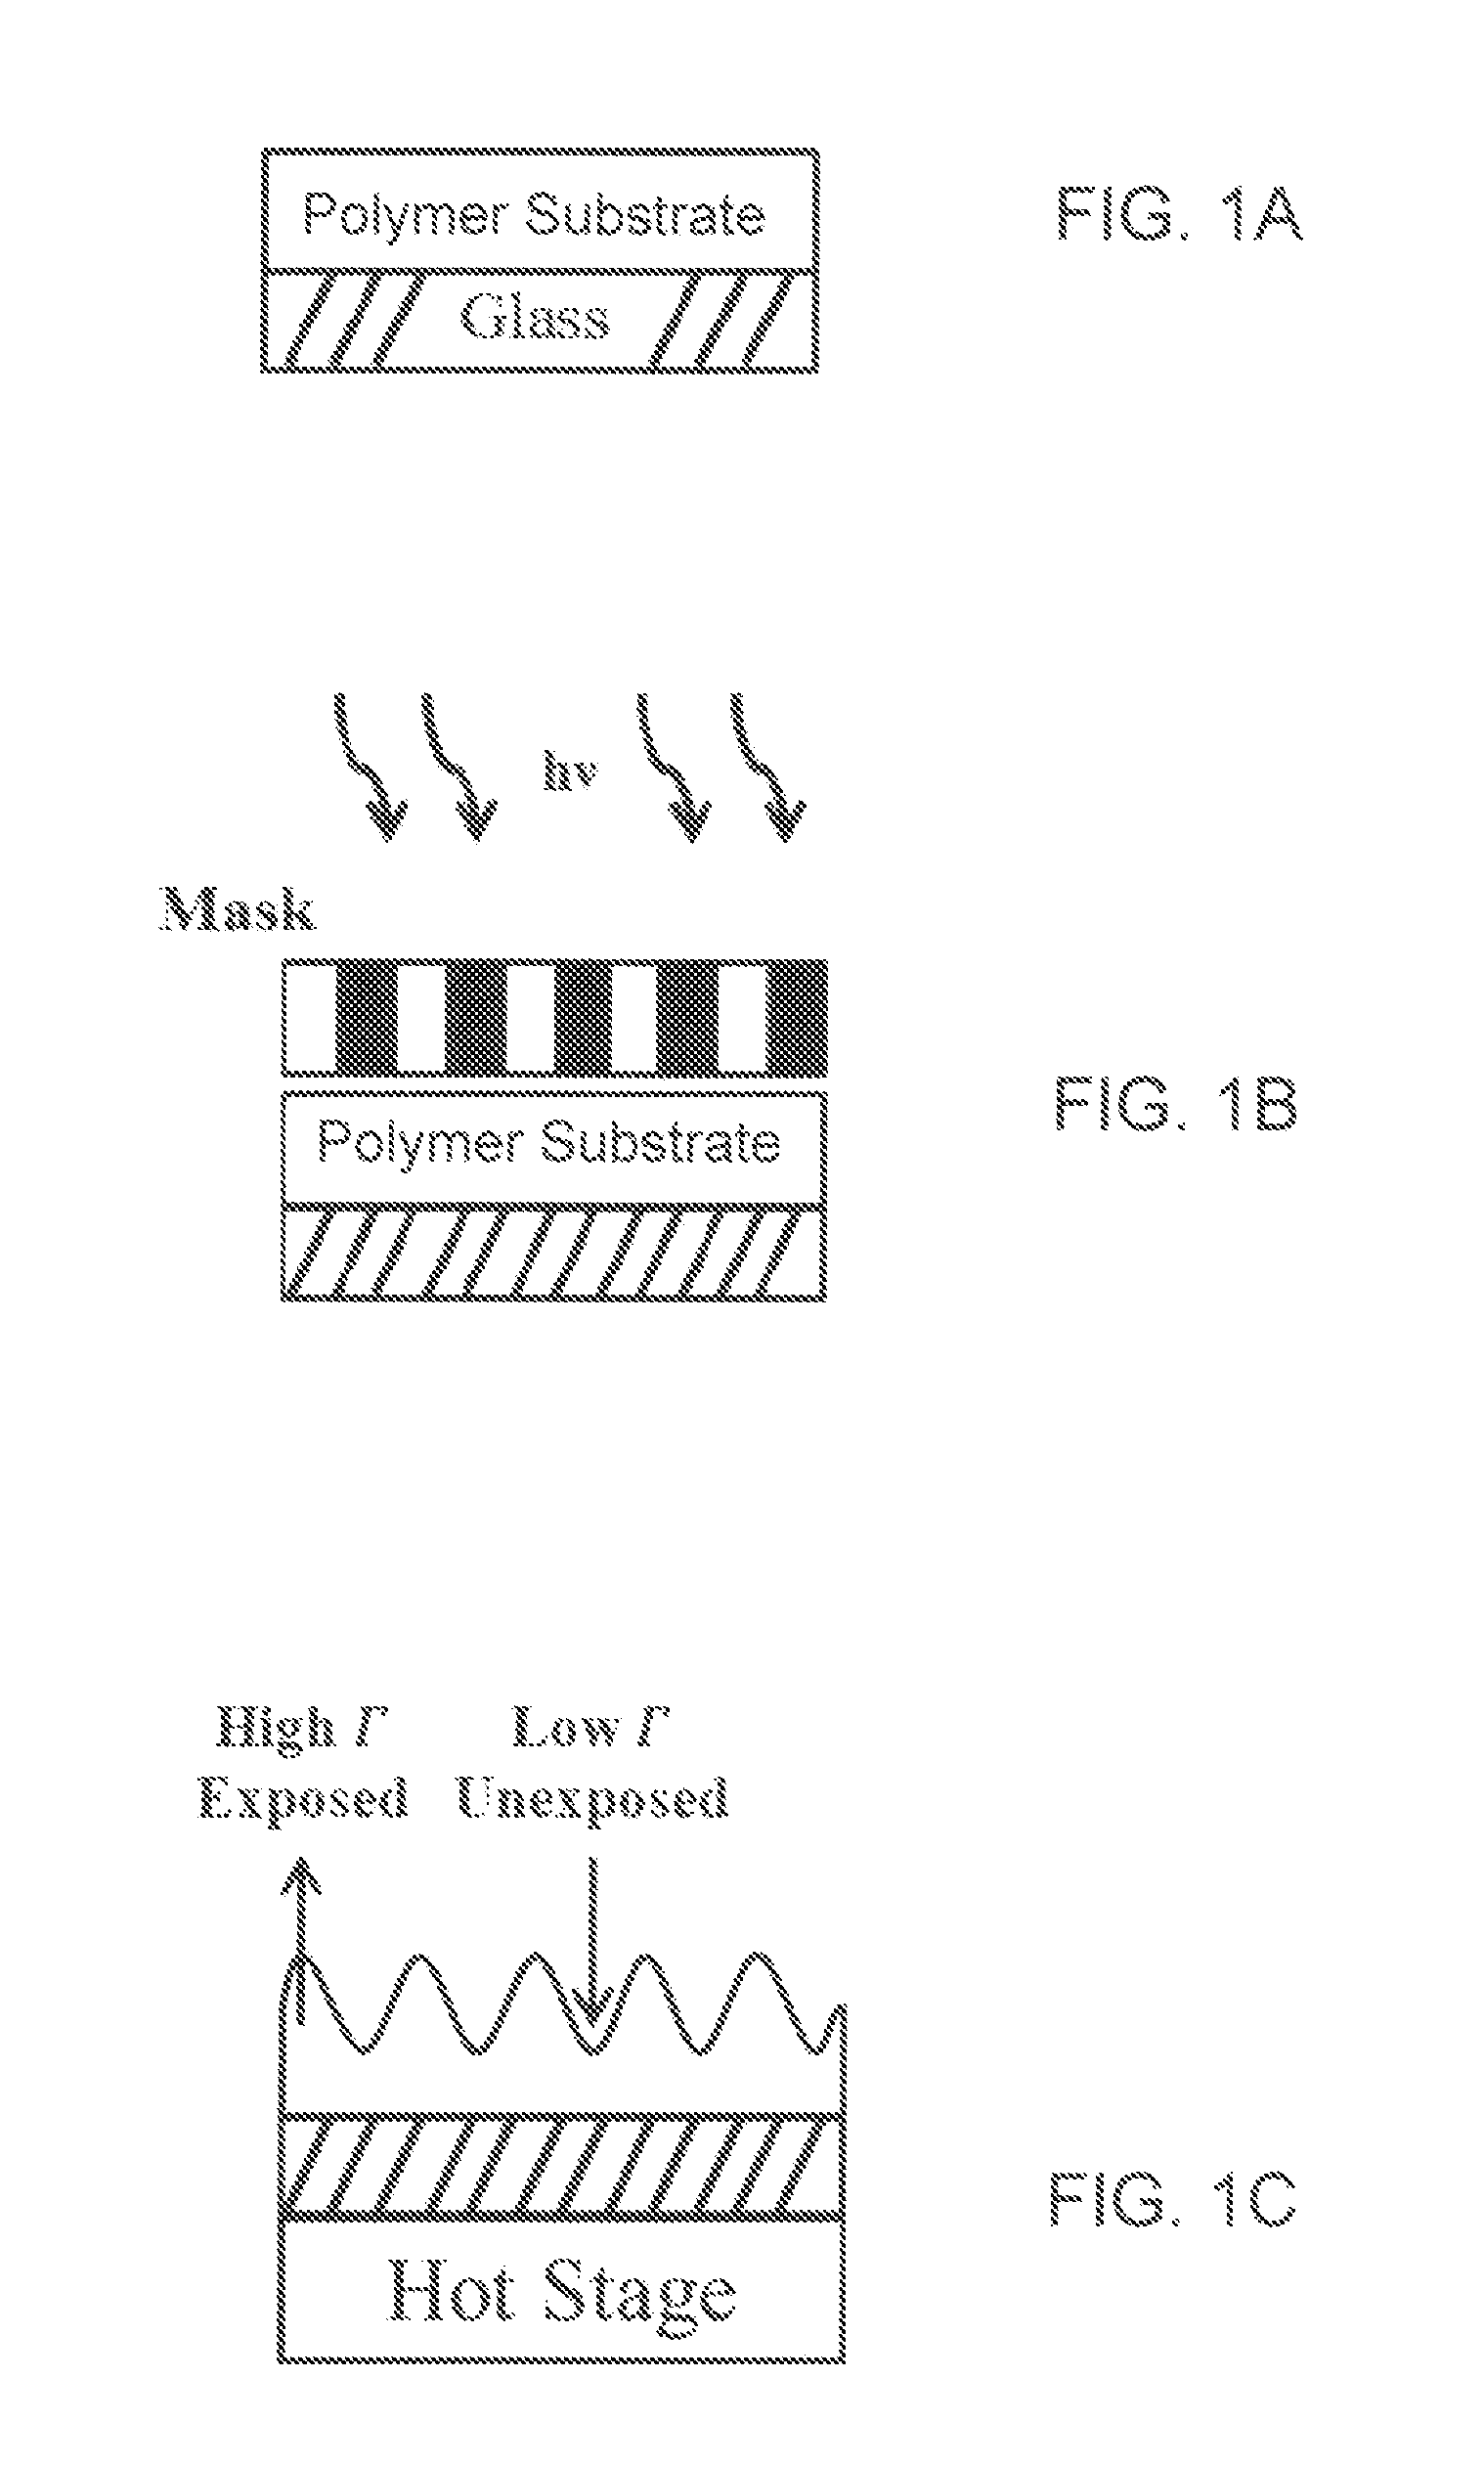 Method for creating topographical patterns in polymers via surface energy patterned films and the marangoni effect